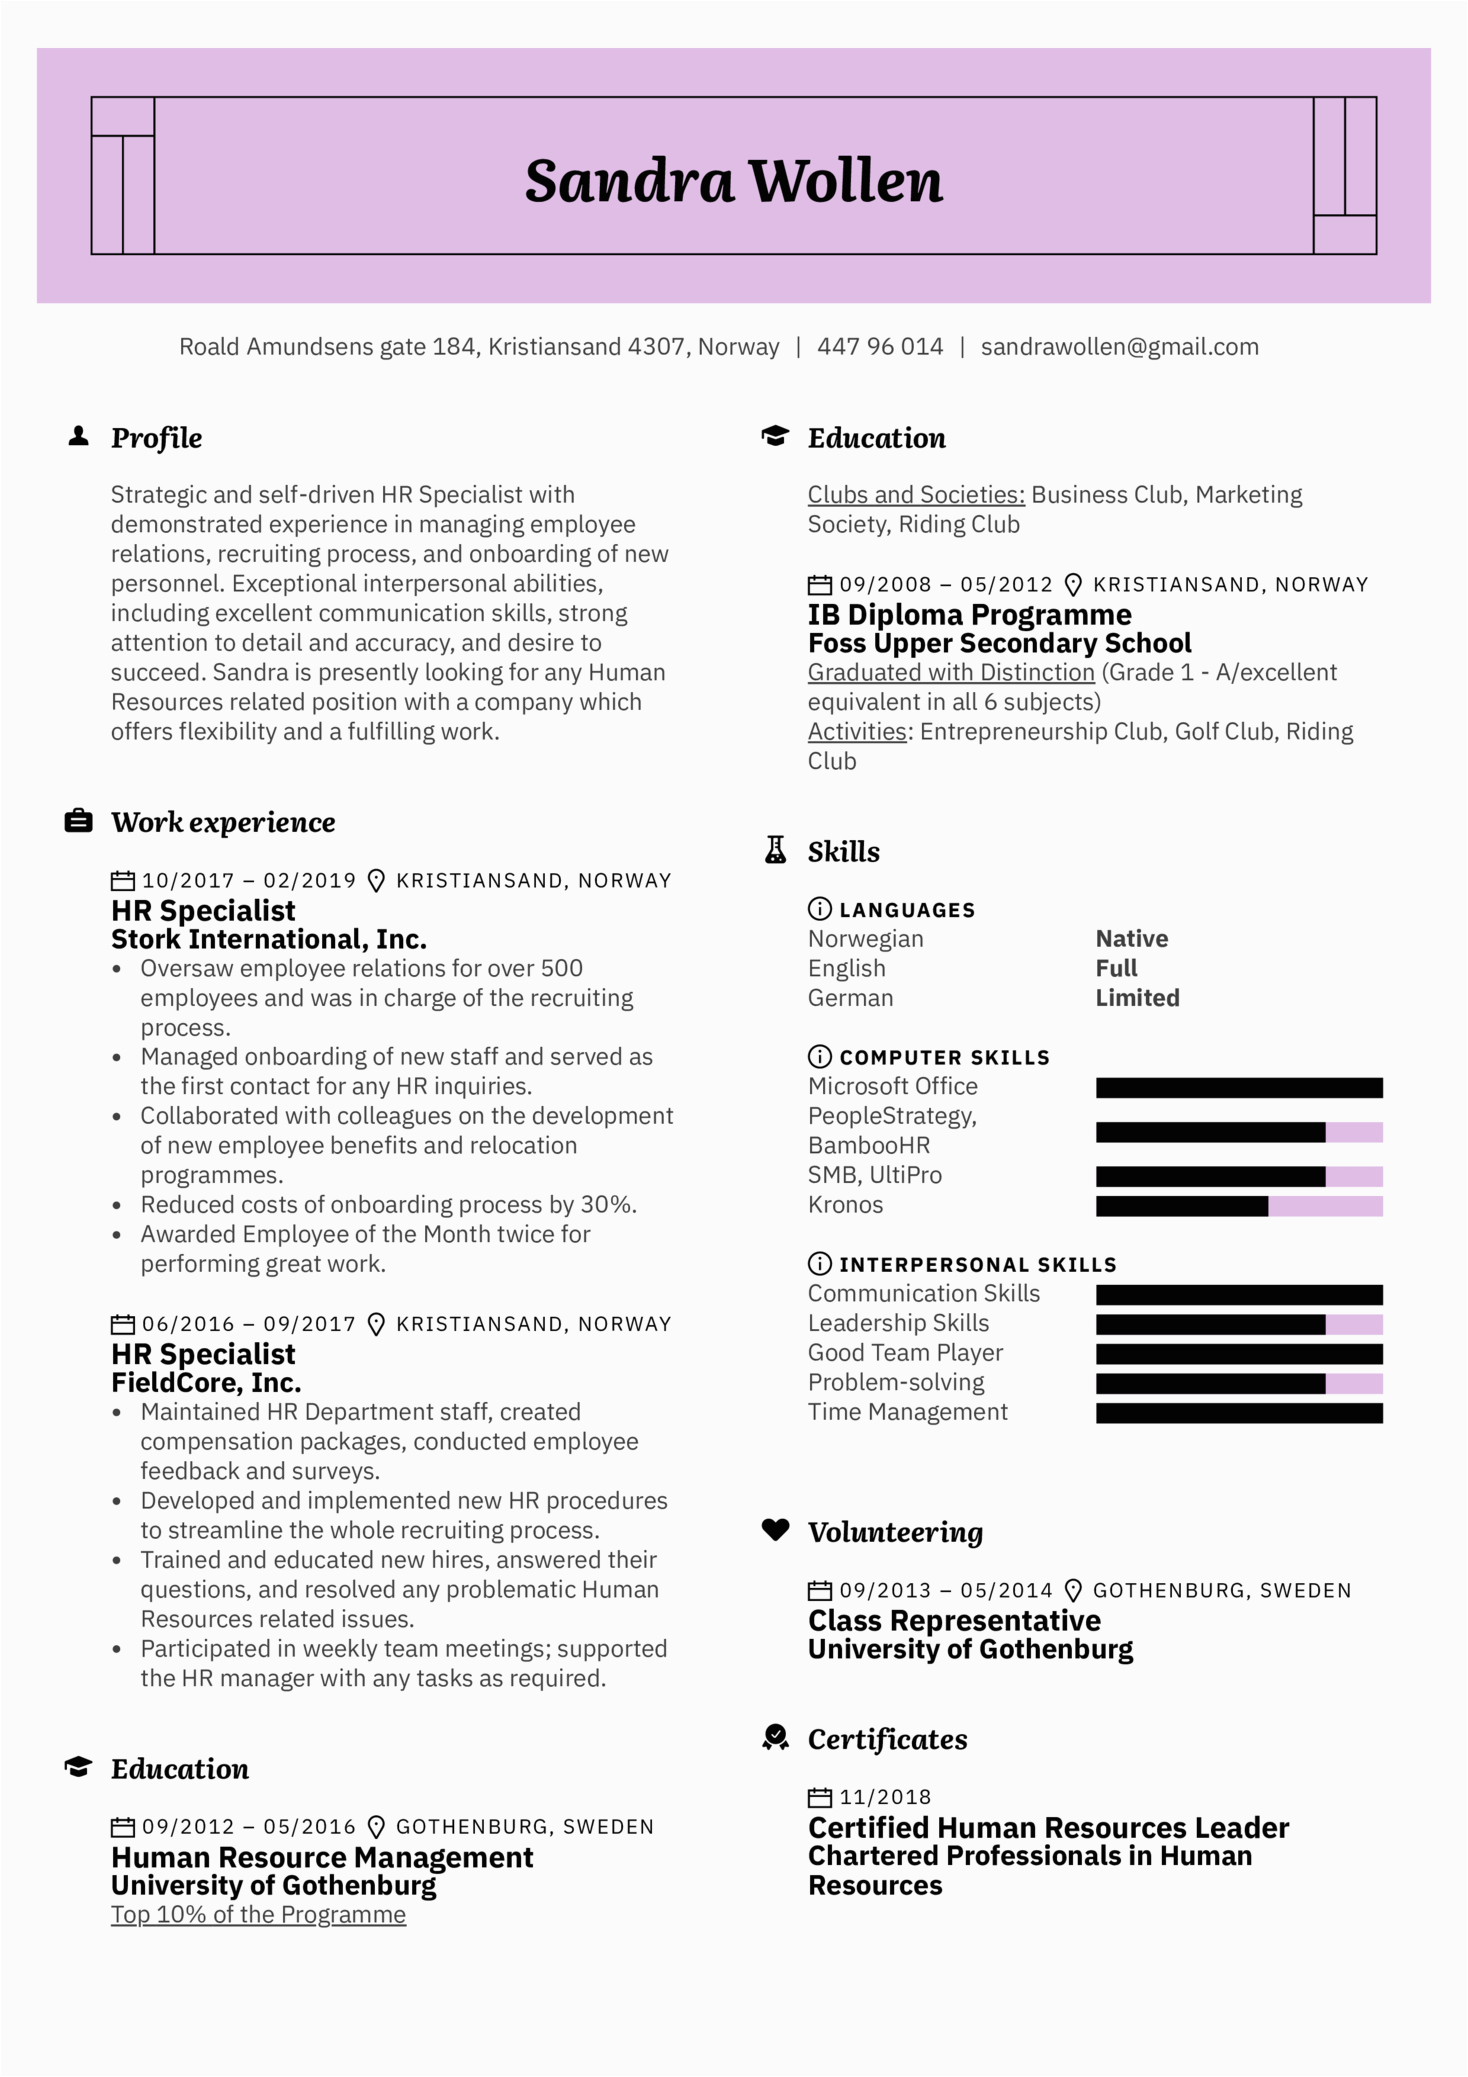 Sample Resume for Career Change to Human Resources Human Resources Resume Template